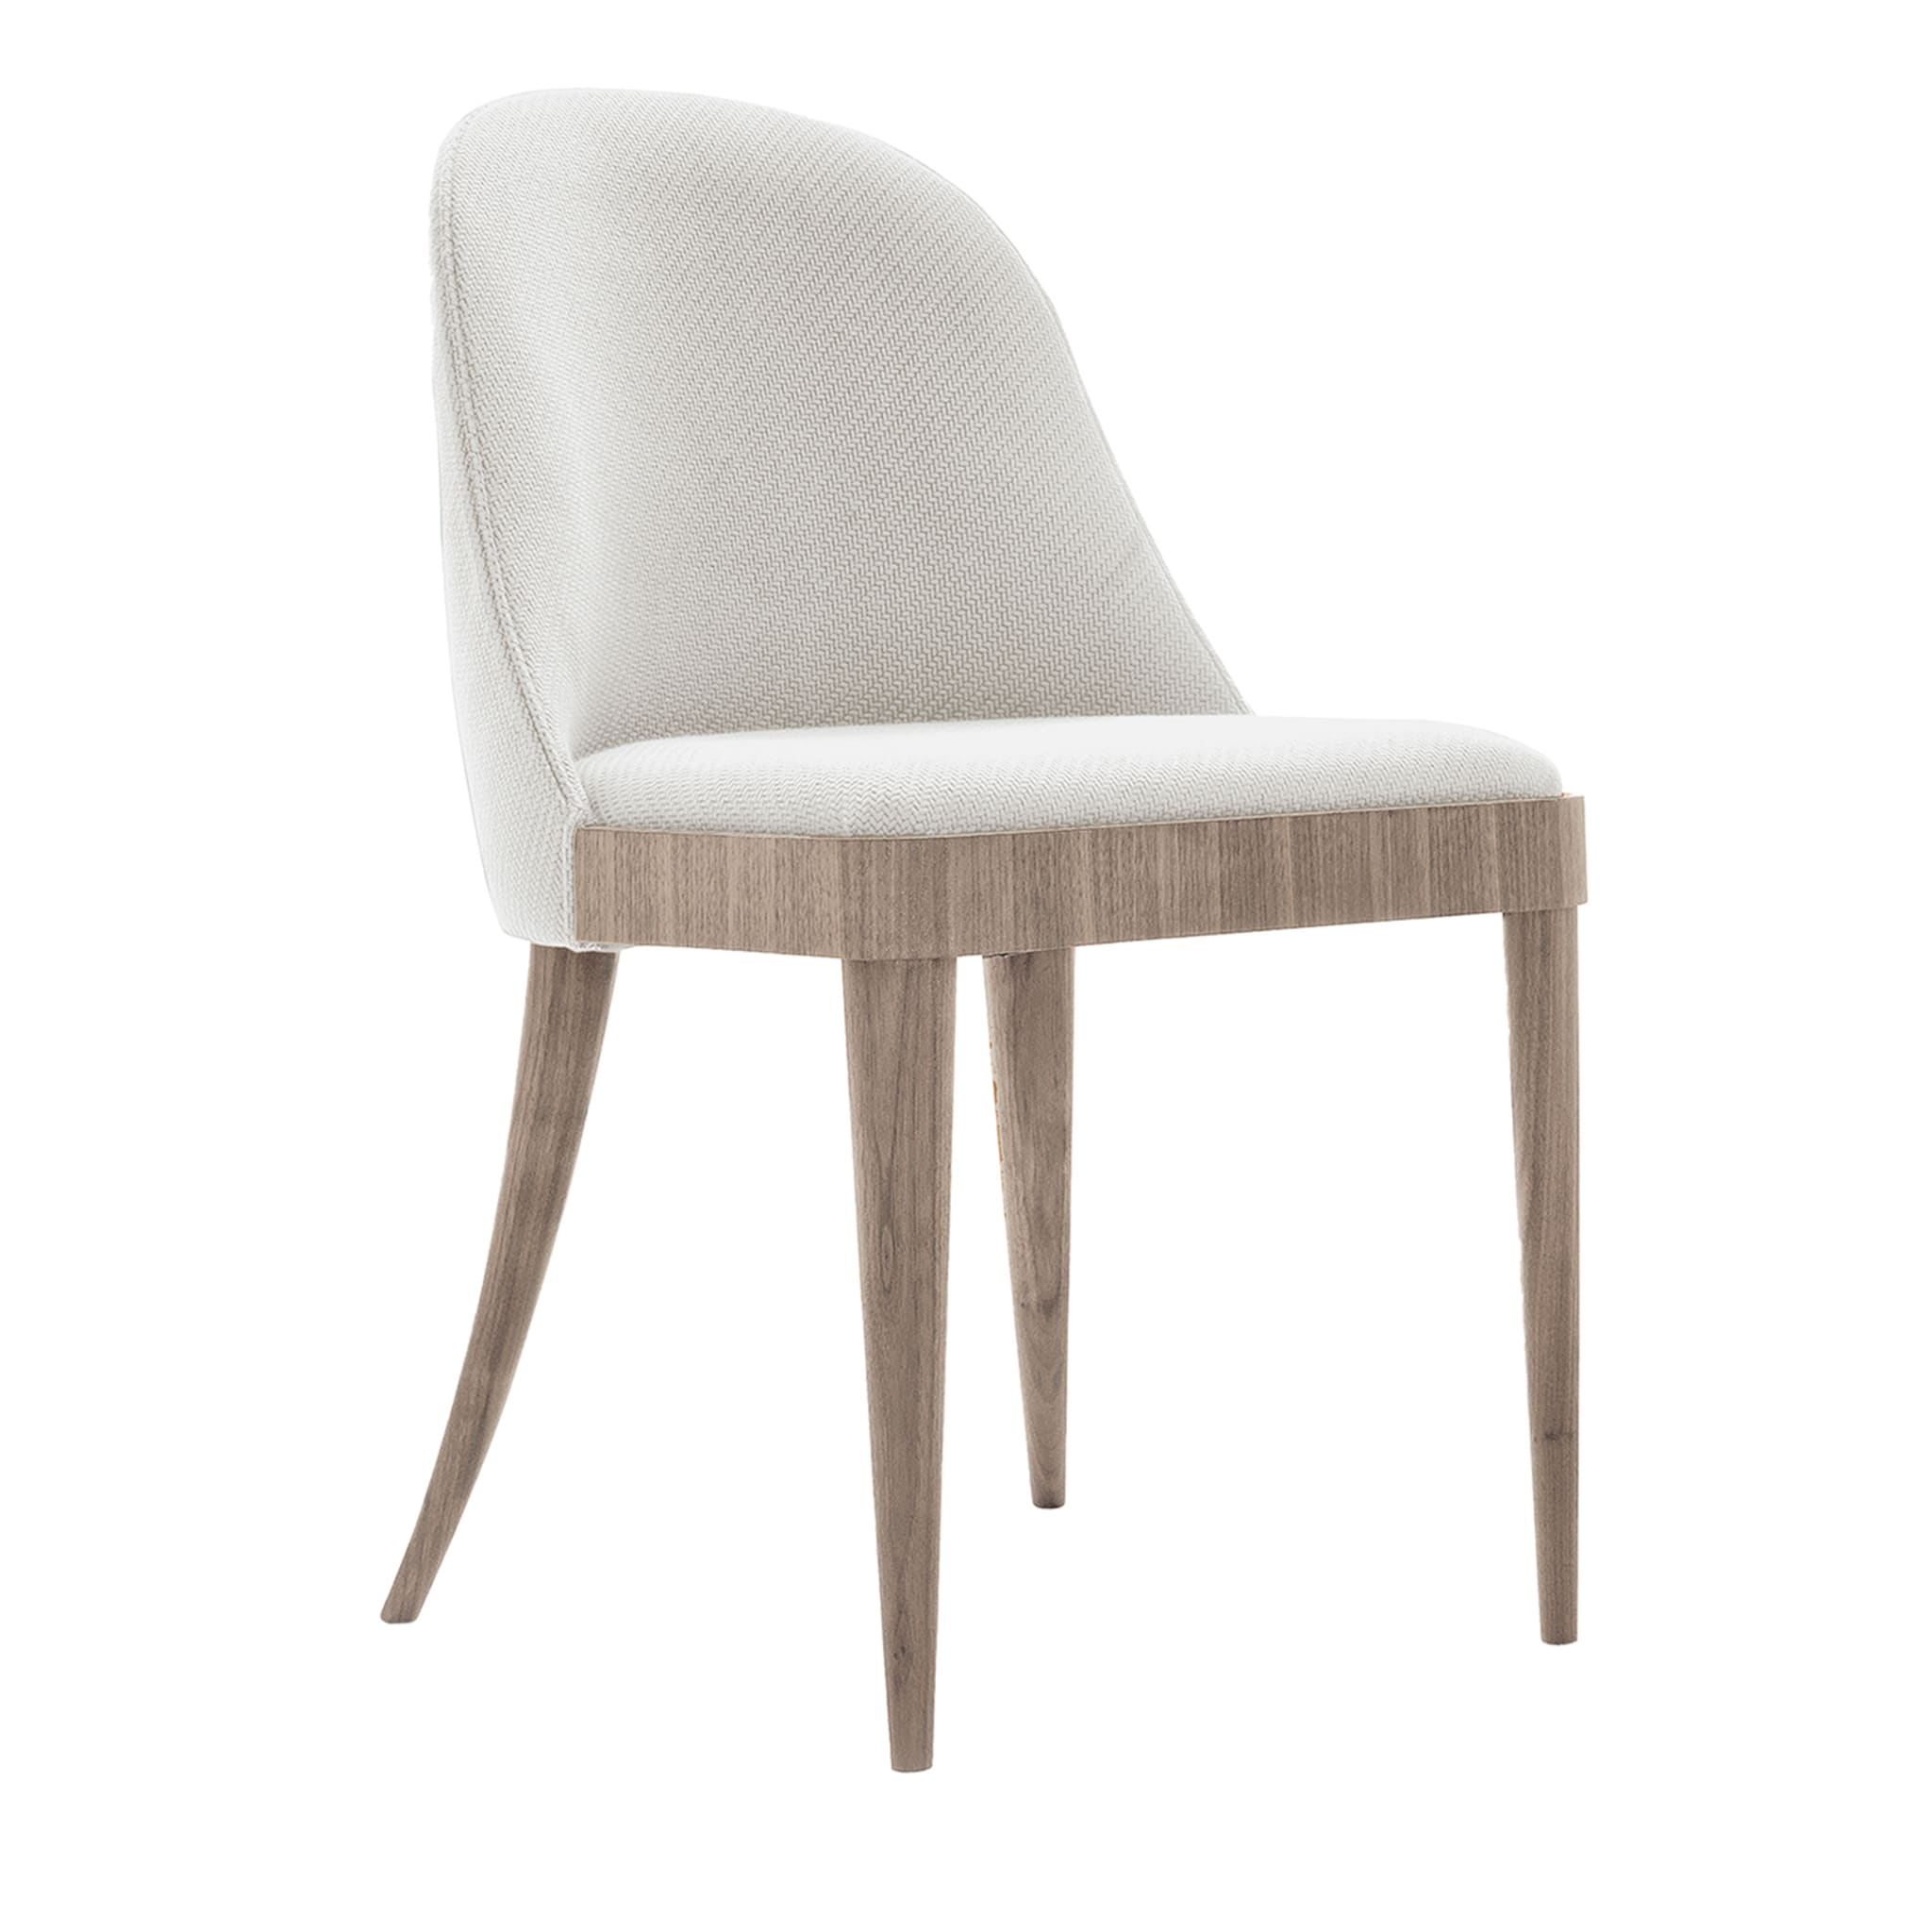 Cordiale chair #1 - Main view